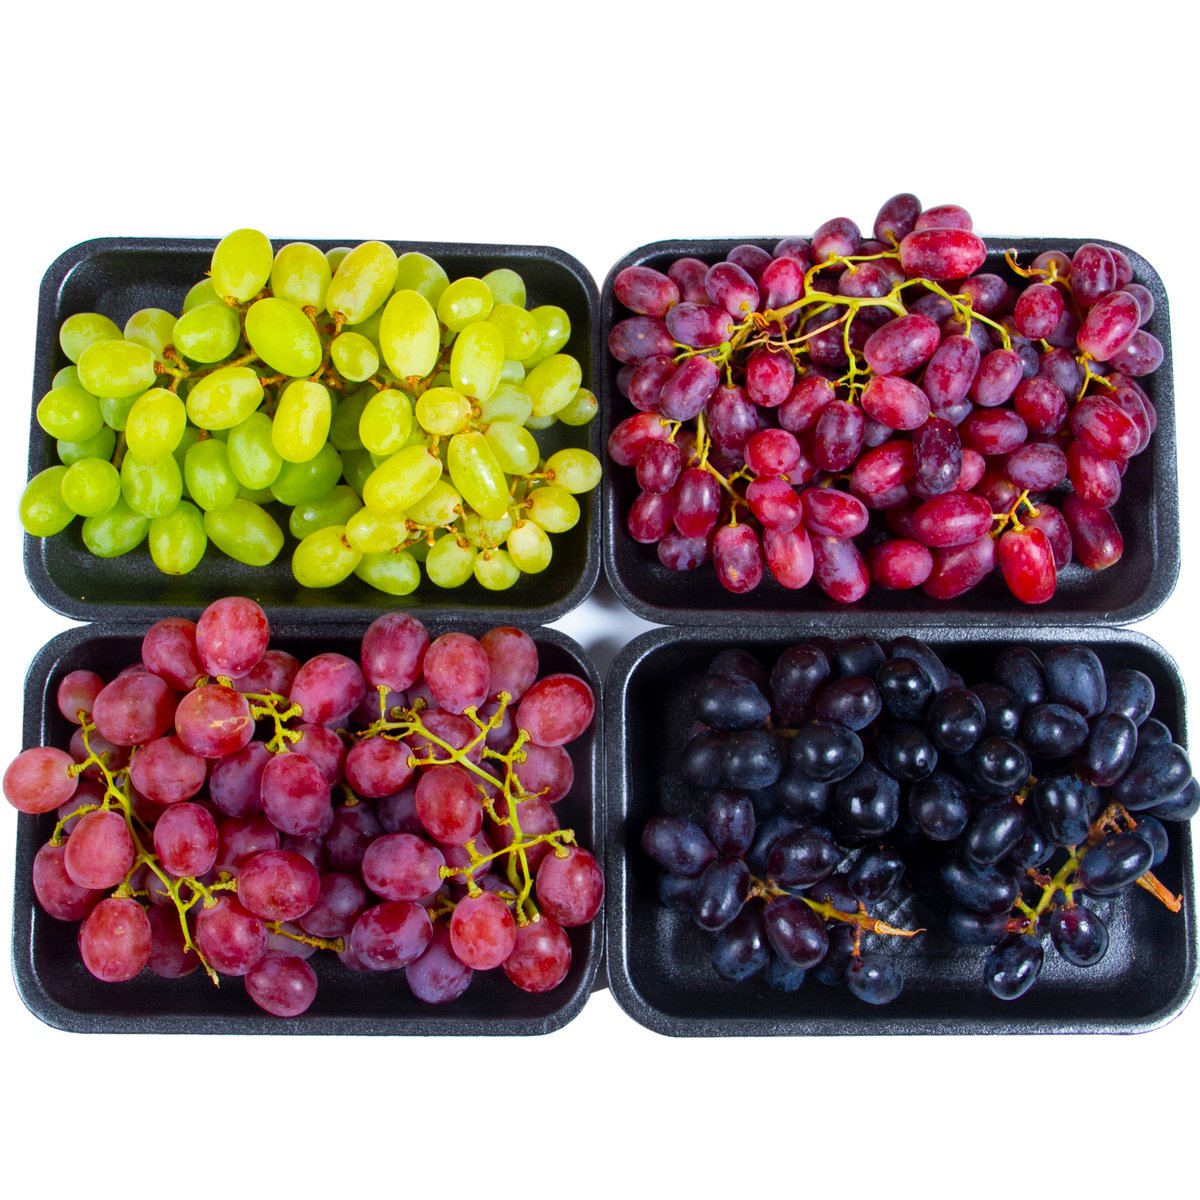 Grapes Combo Pack 2 kg